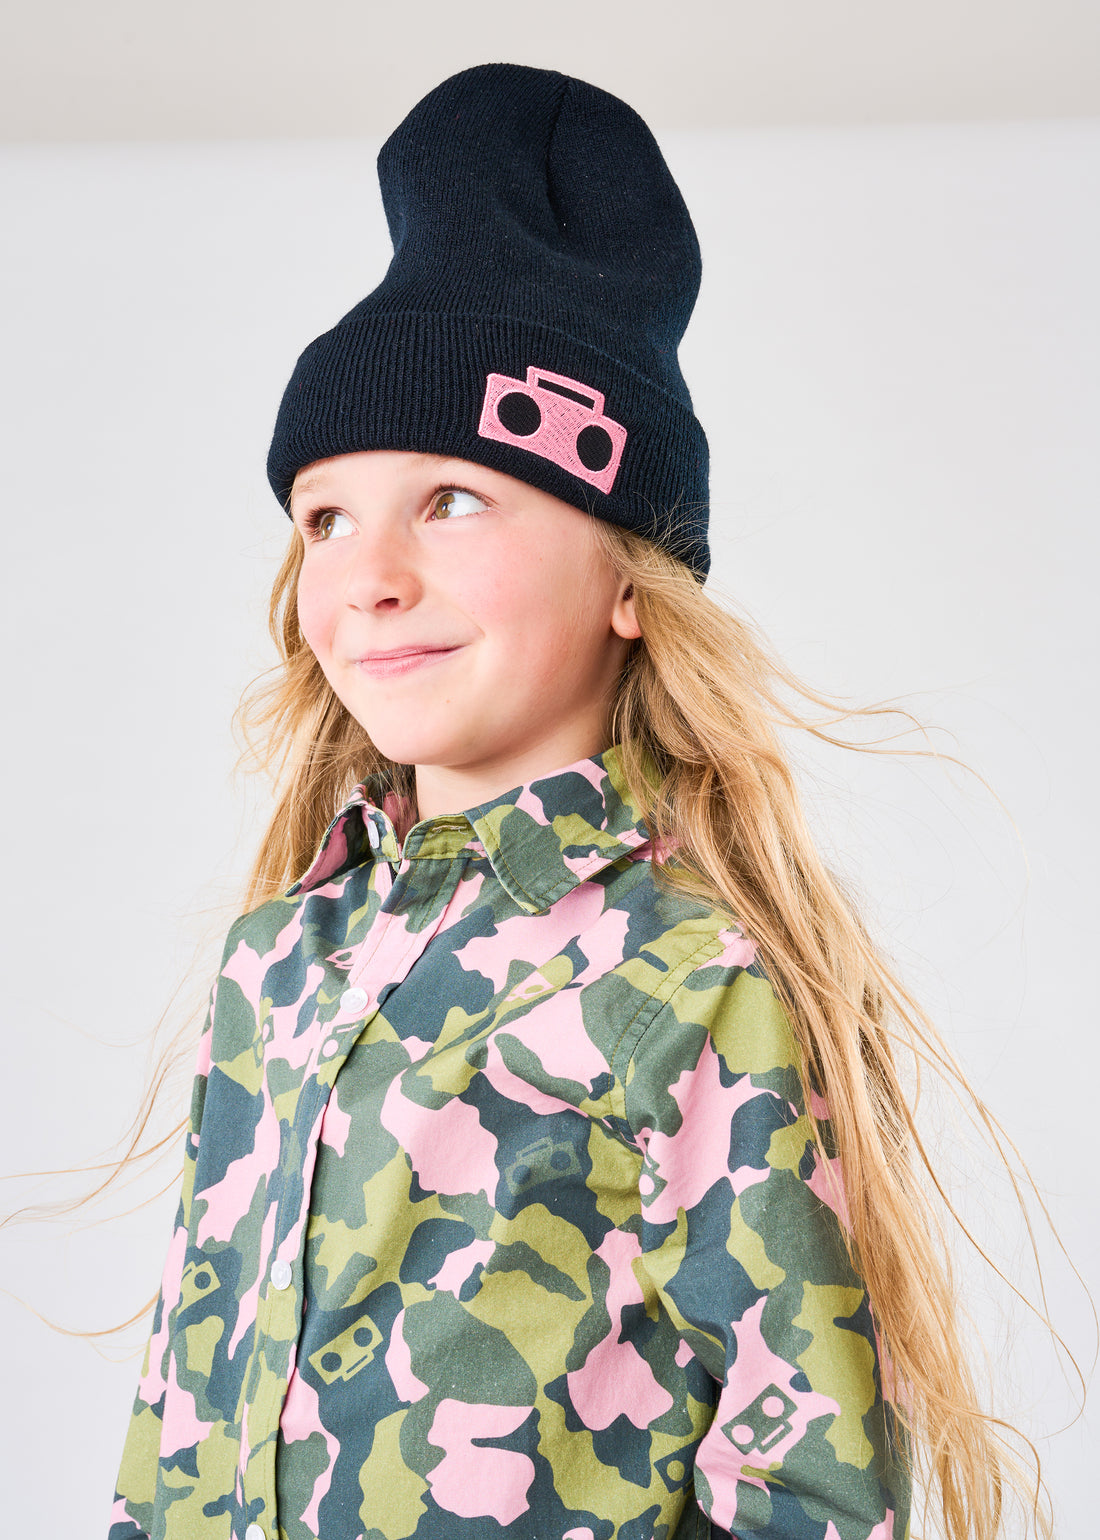 Kids Self expression is amplified in style with new Camo Zip Shirt and Hot Pink Boombox Knit Beanie Cap